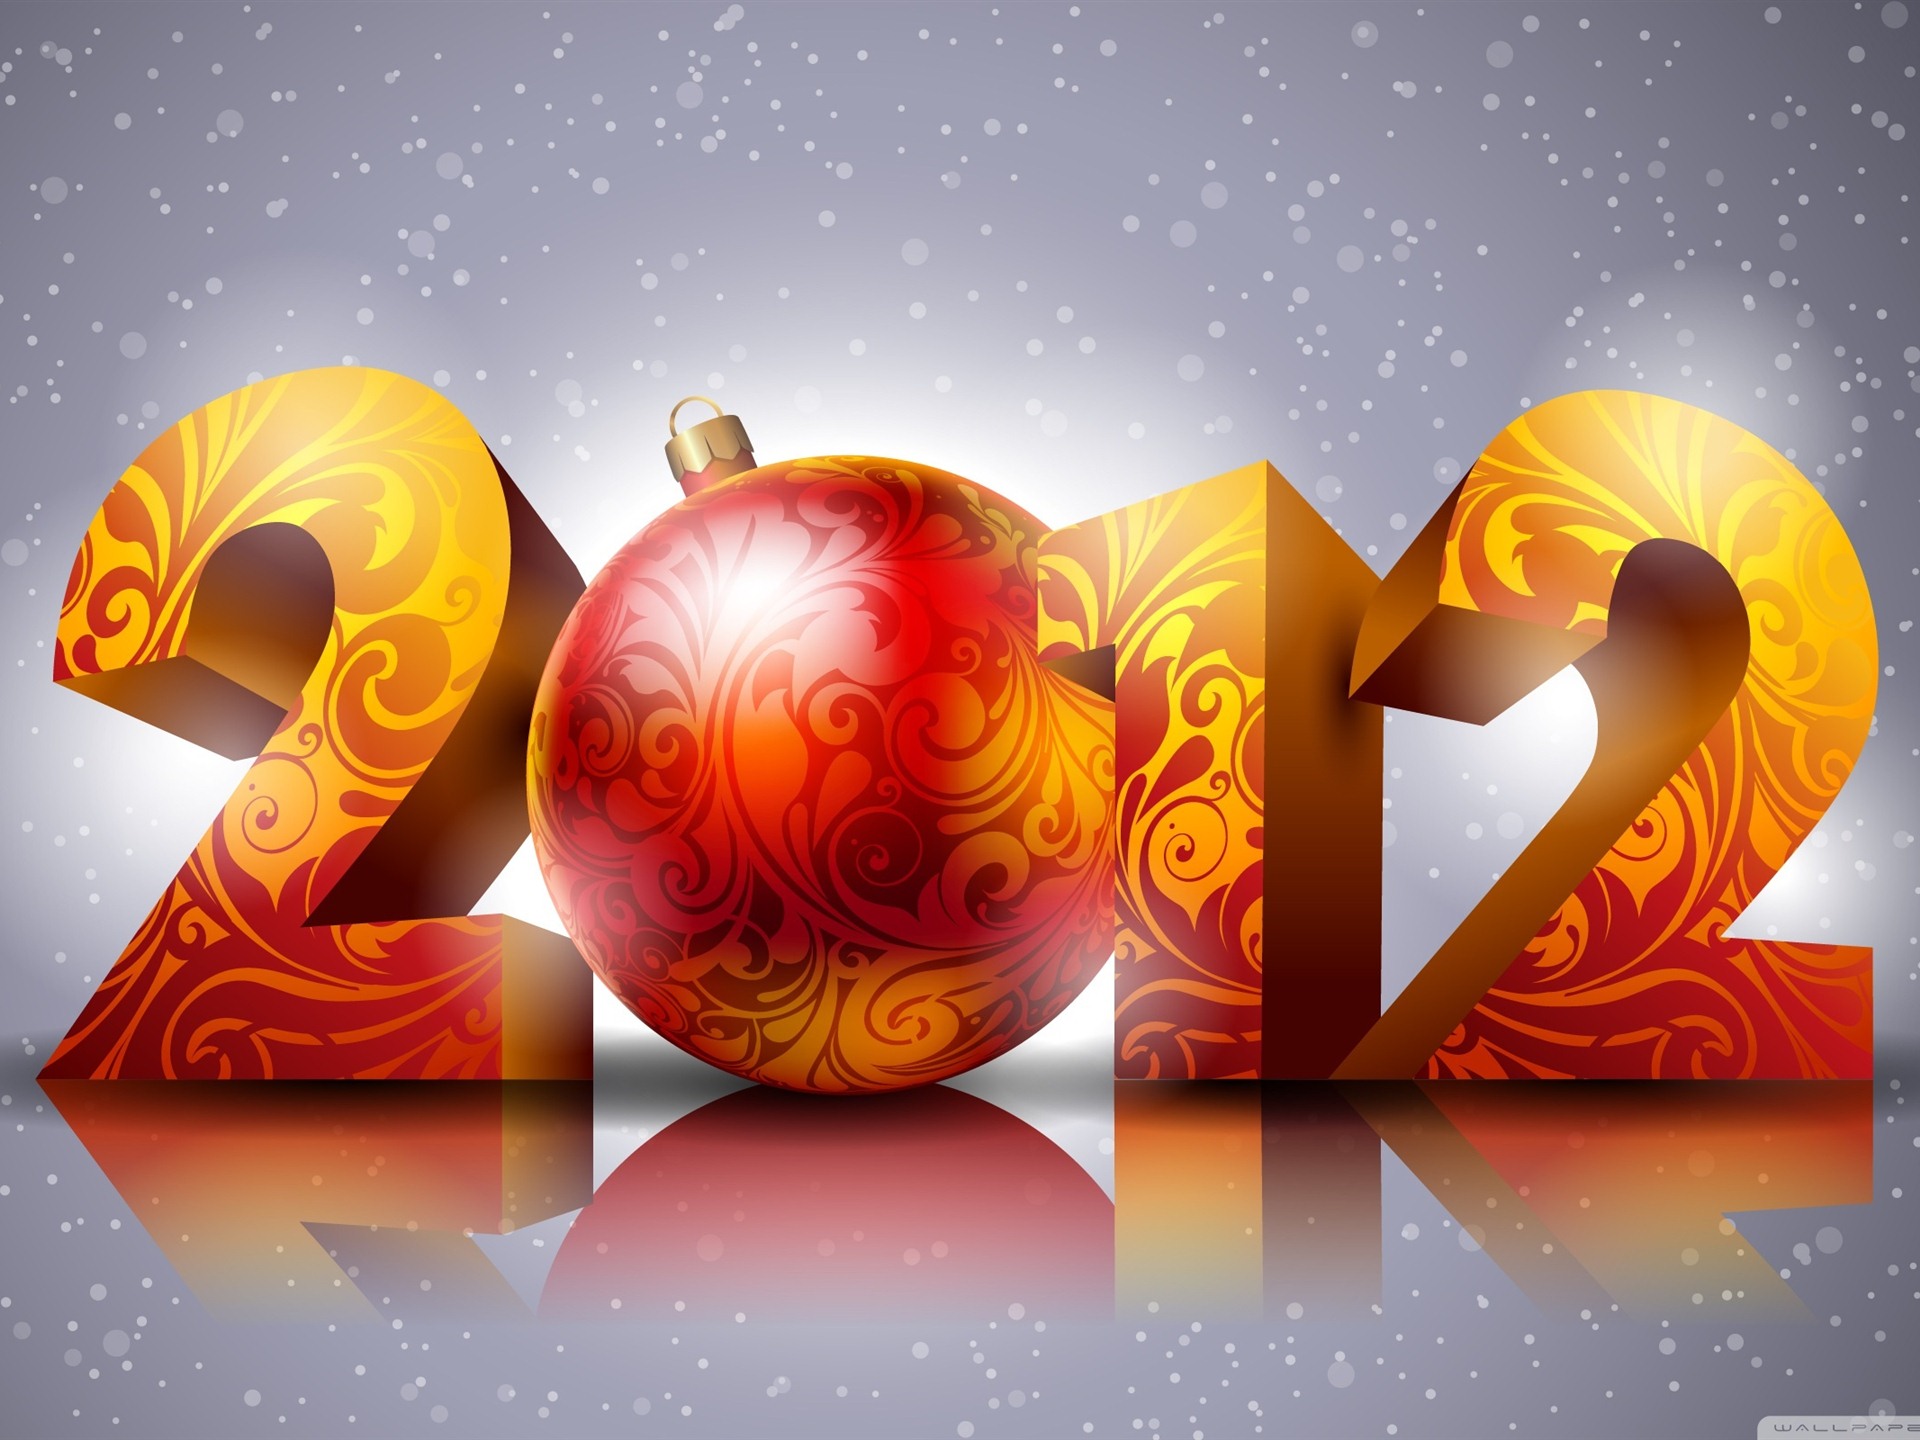 2012 New Year wallpapers (1) #10 - 1920x1440